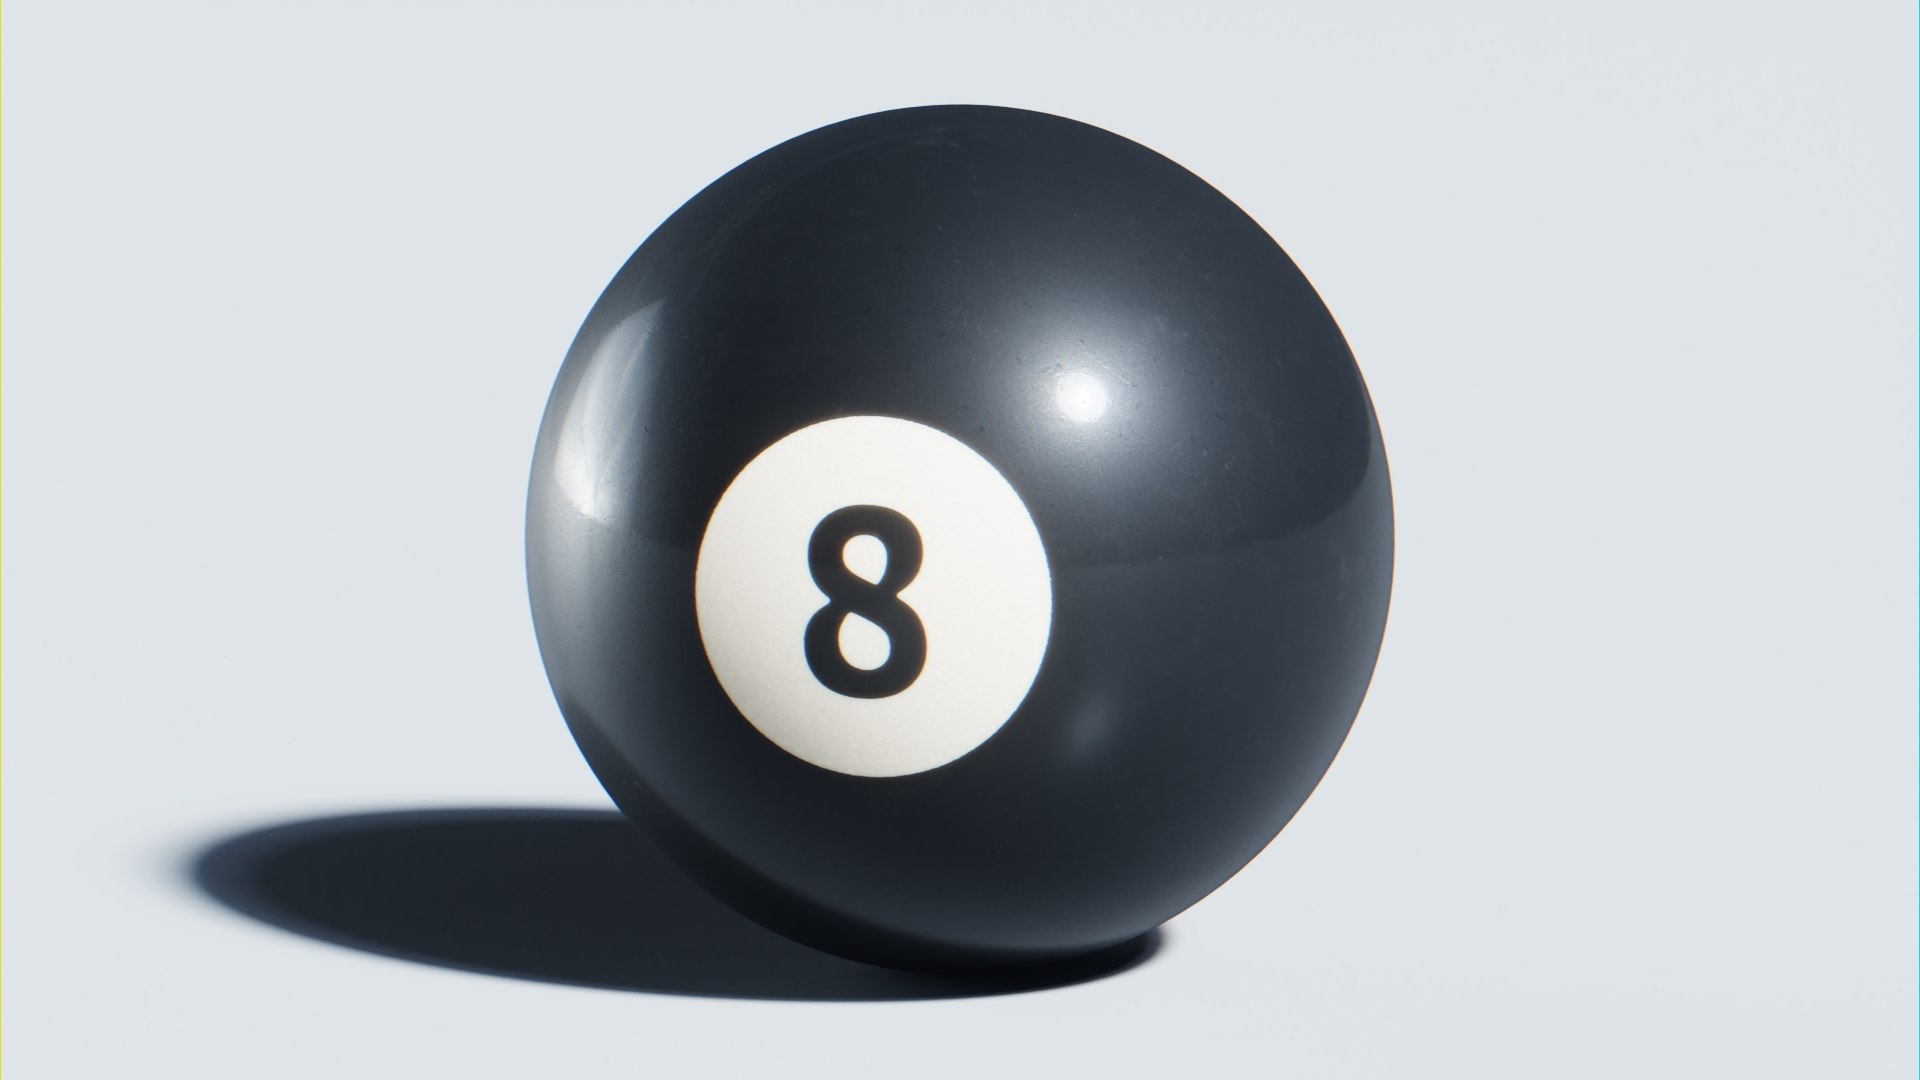 62,474 8 Ball Images, Stock Photos, 3D objects, & Vectors